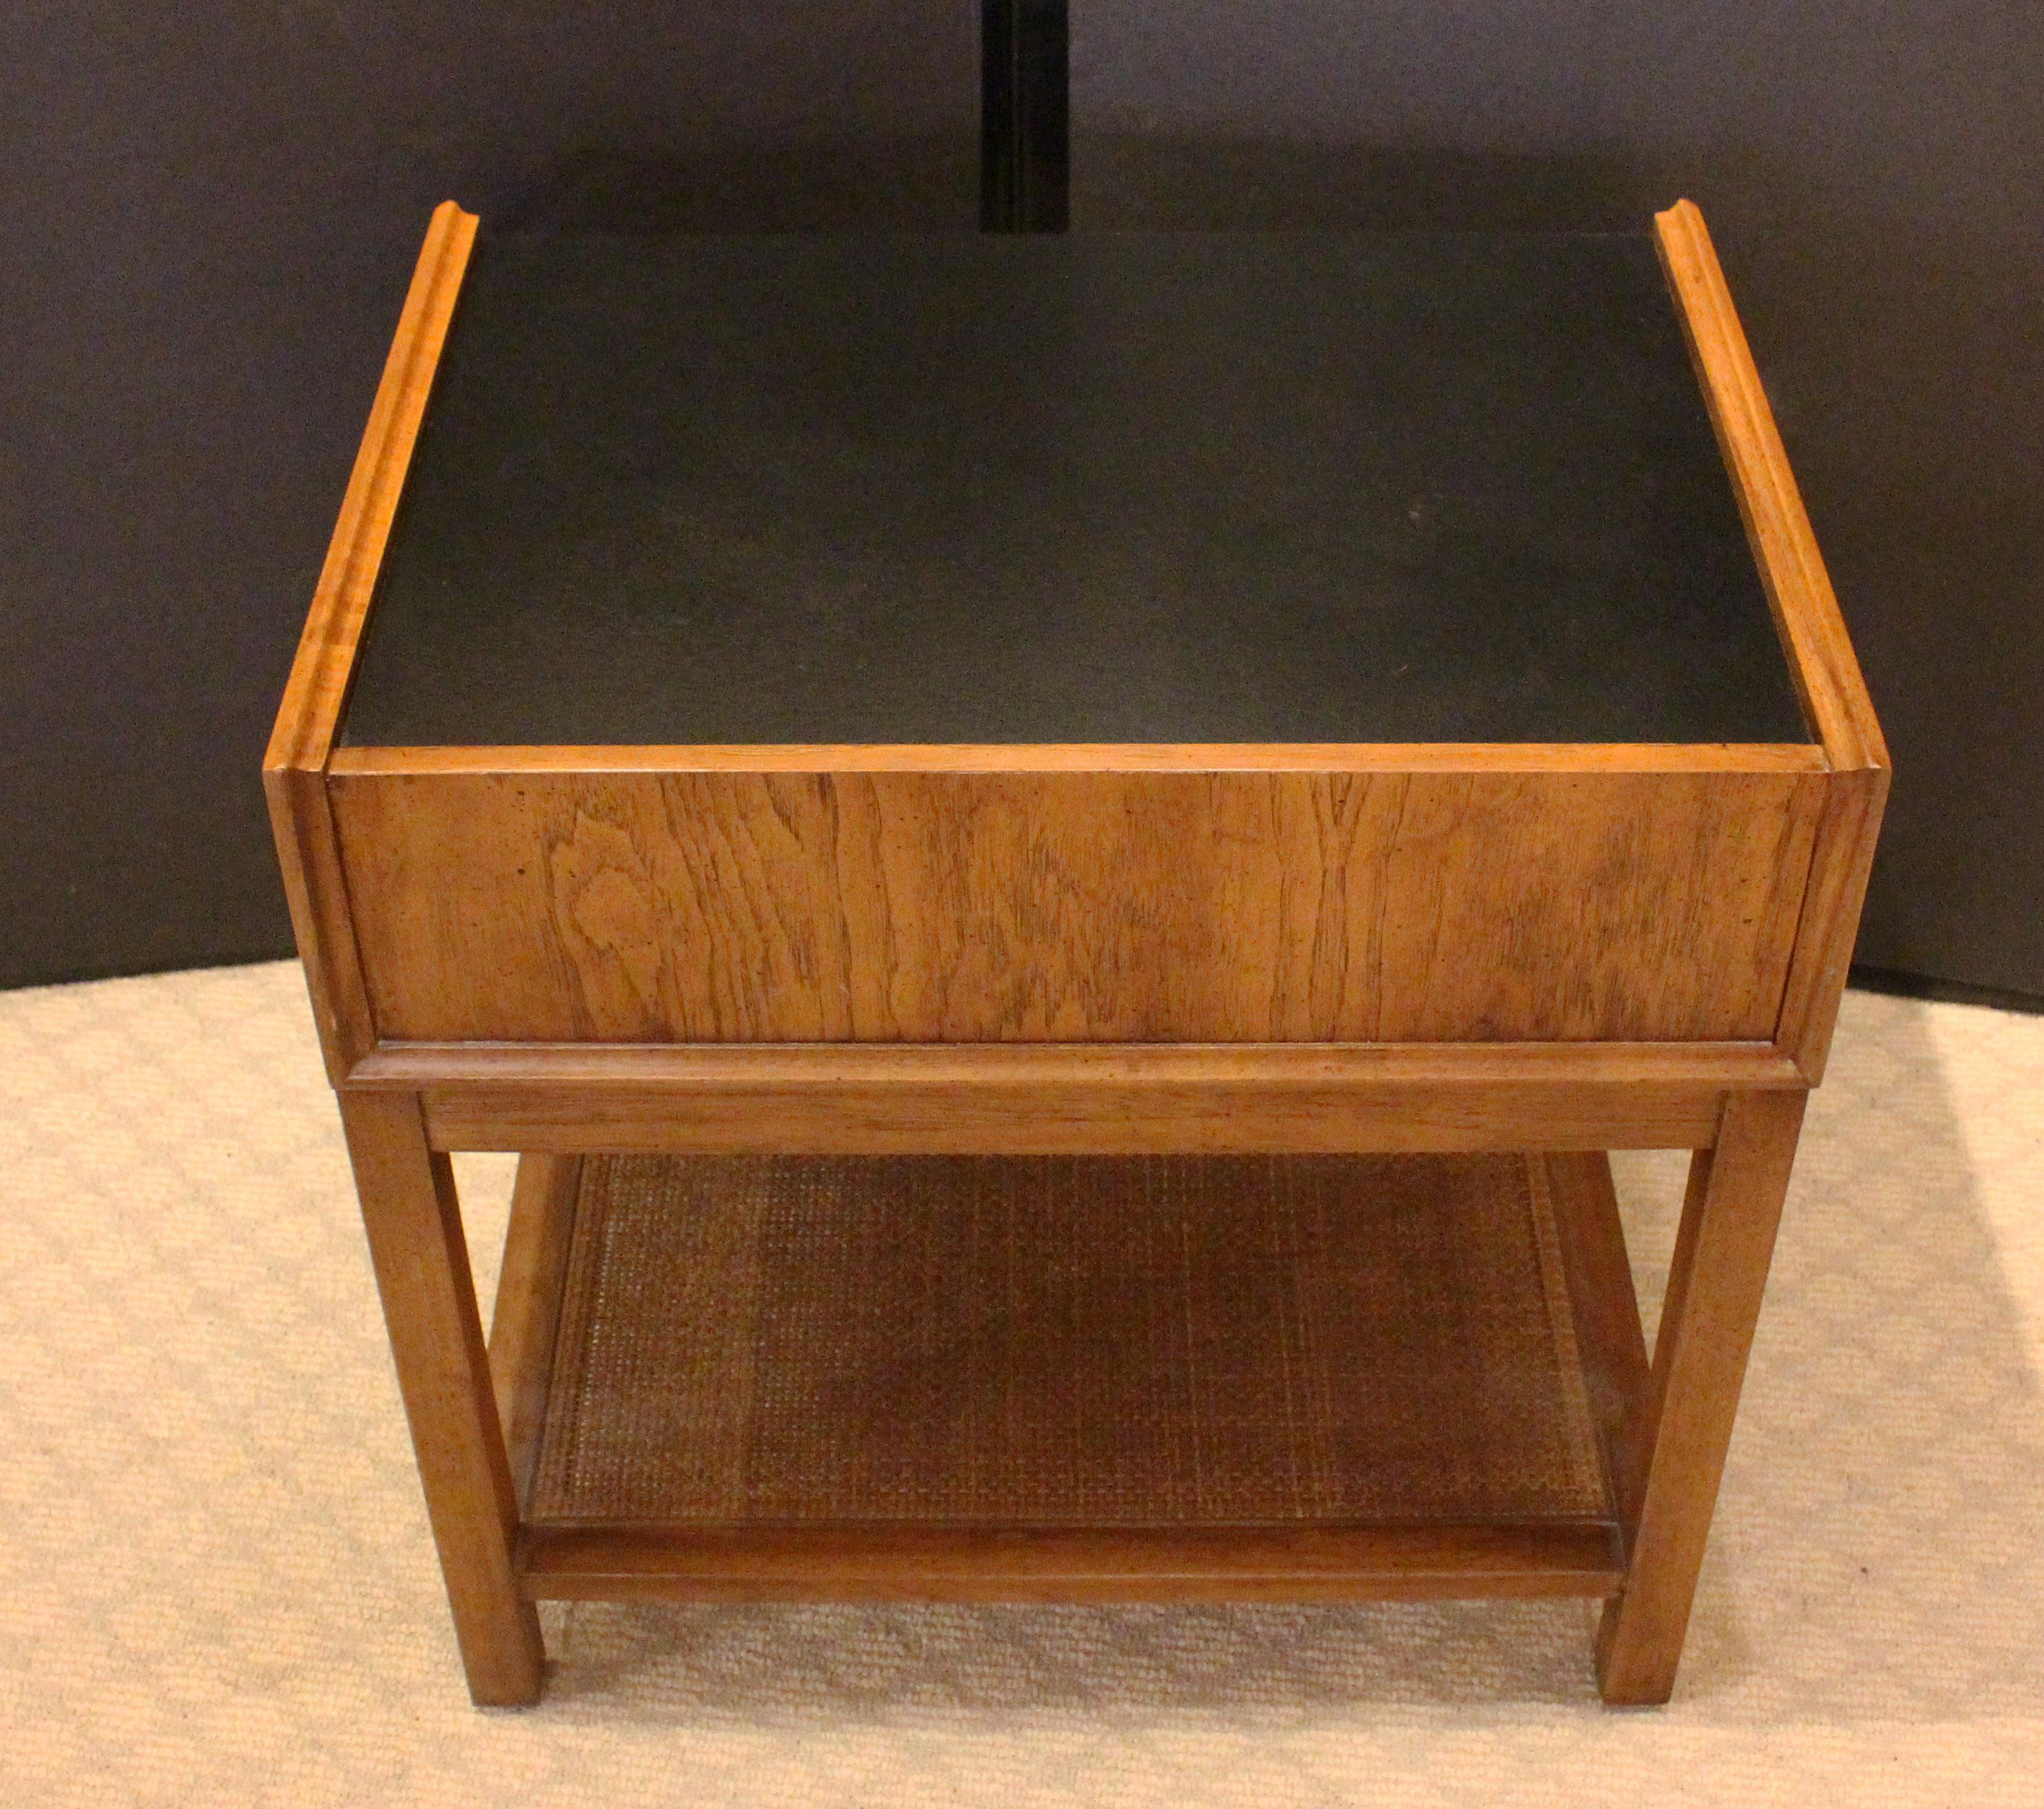 American Mid Century Modern Night Stand Made by Founders, c.1960s